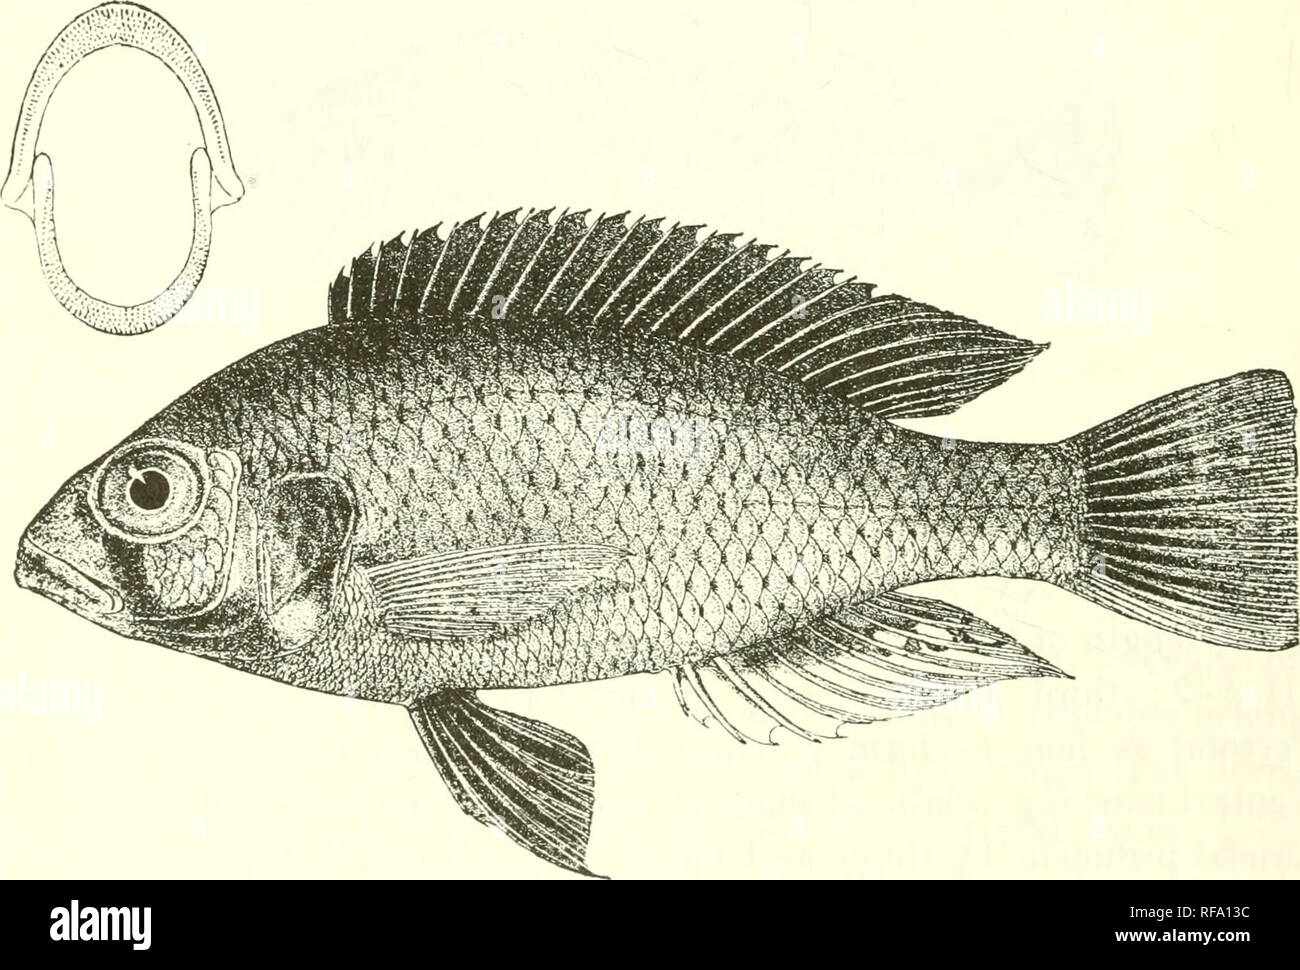 . Catalogue of the fresh-water fishes of Africa in the British Museum (Natural History). Fishes; Freshwater animals. 240 CICIILID.E. latter sometimes with one or two orange ocellar spots in tlie posterior part; ventral fins yellow in the females, black in the males. Total length 110 millim. Lakes Victoria and Albert Edward. 1-7. Types. Bunjako. 8. Yg. Kisumu Bay, KavironJo, 9-12. Ad. L. Albert Edward. Mr. E. Degen (C). A. Blayney Percival, Esq. (P.). Dr. H. Schiibotz (C.) ; German C. African Expedition. 72. TILAPIA BAYONI. Bouleng. Ann. Mus. Genova, (3) v. 1911, p. 72, pi. iii. fig. 2. De[)tli Stock Photo